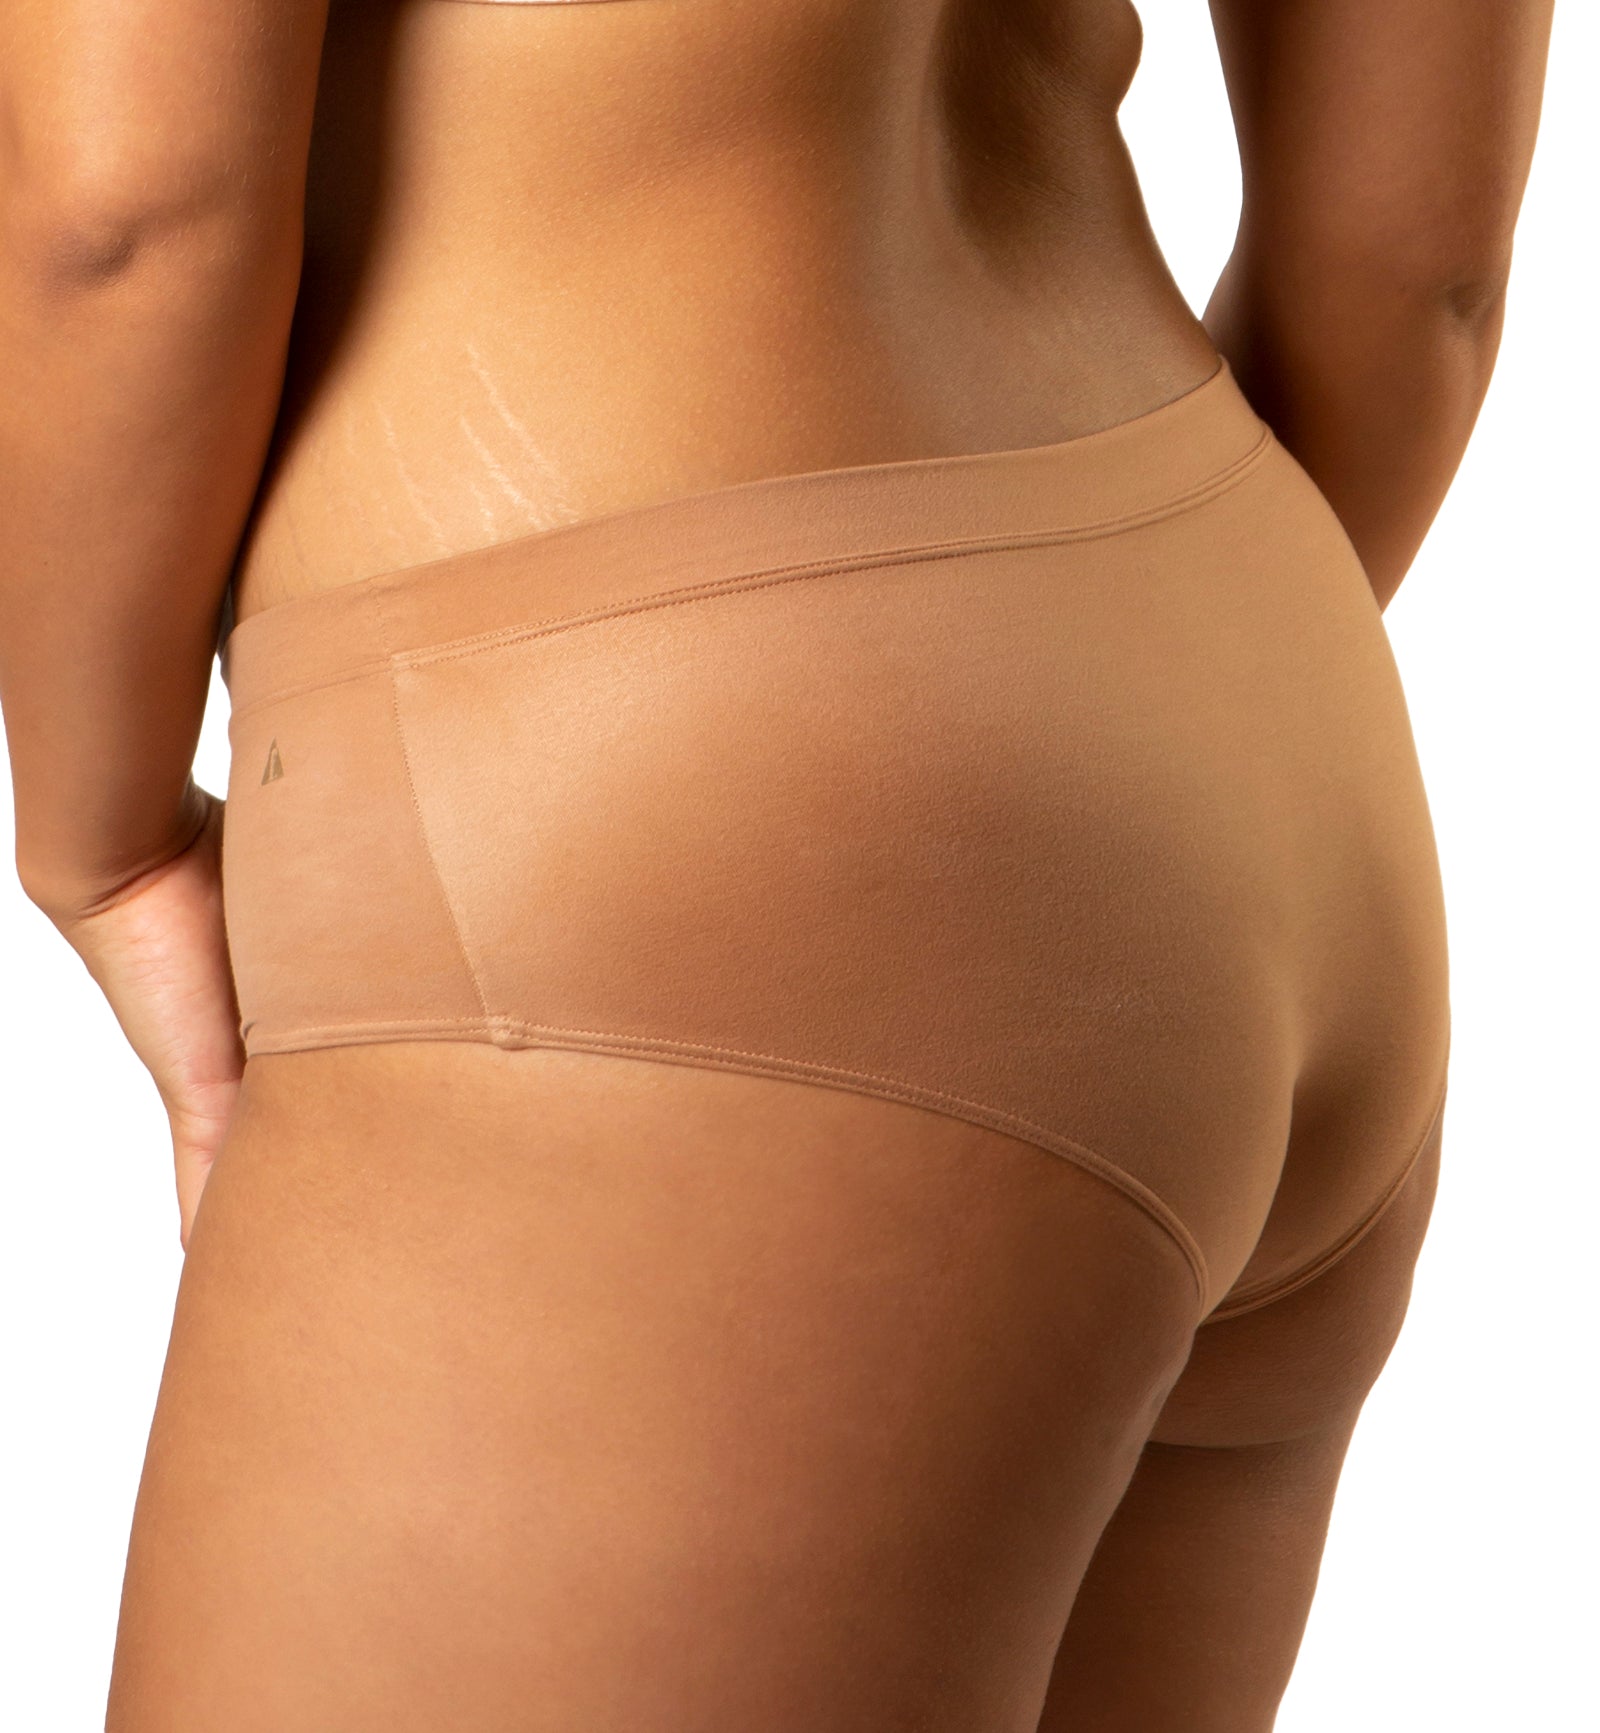 Freedom Brief Panty (FREEDOMBRIEF),8/XS,Clay - Clay,8/XS